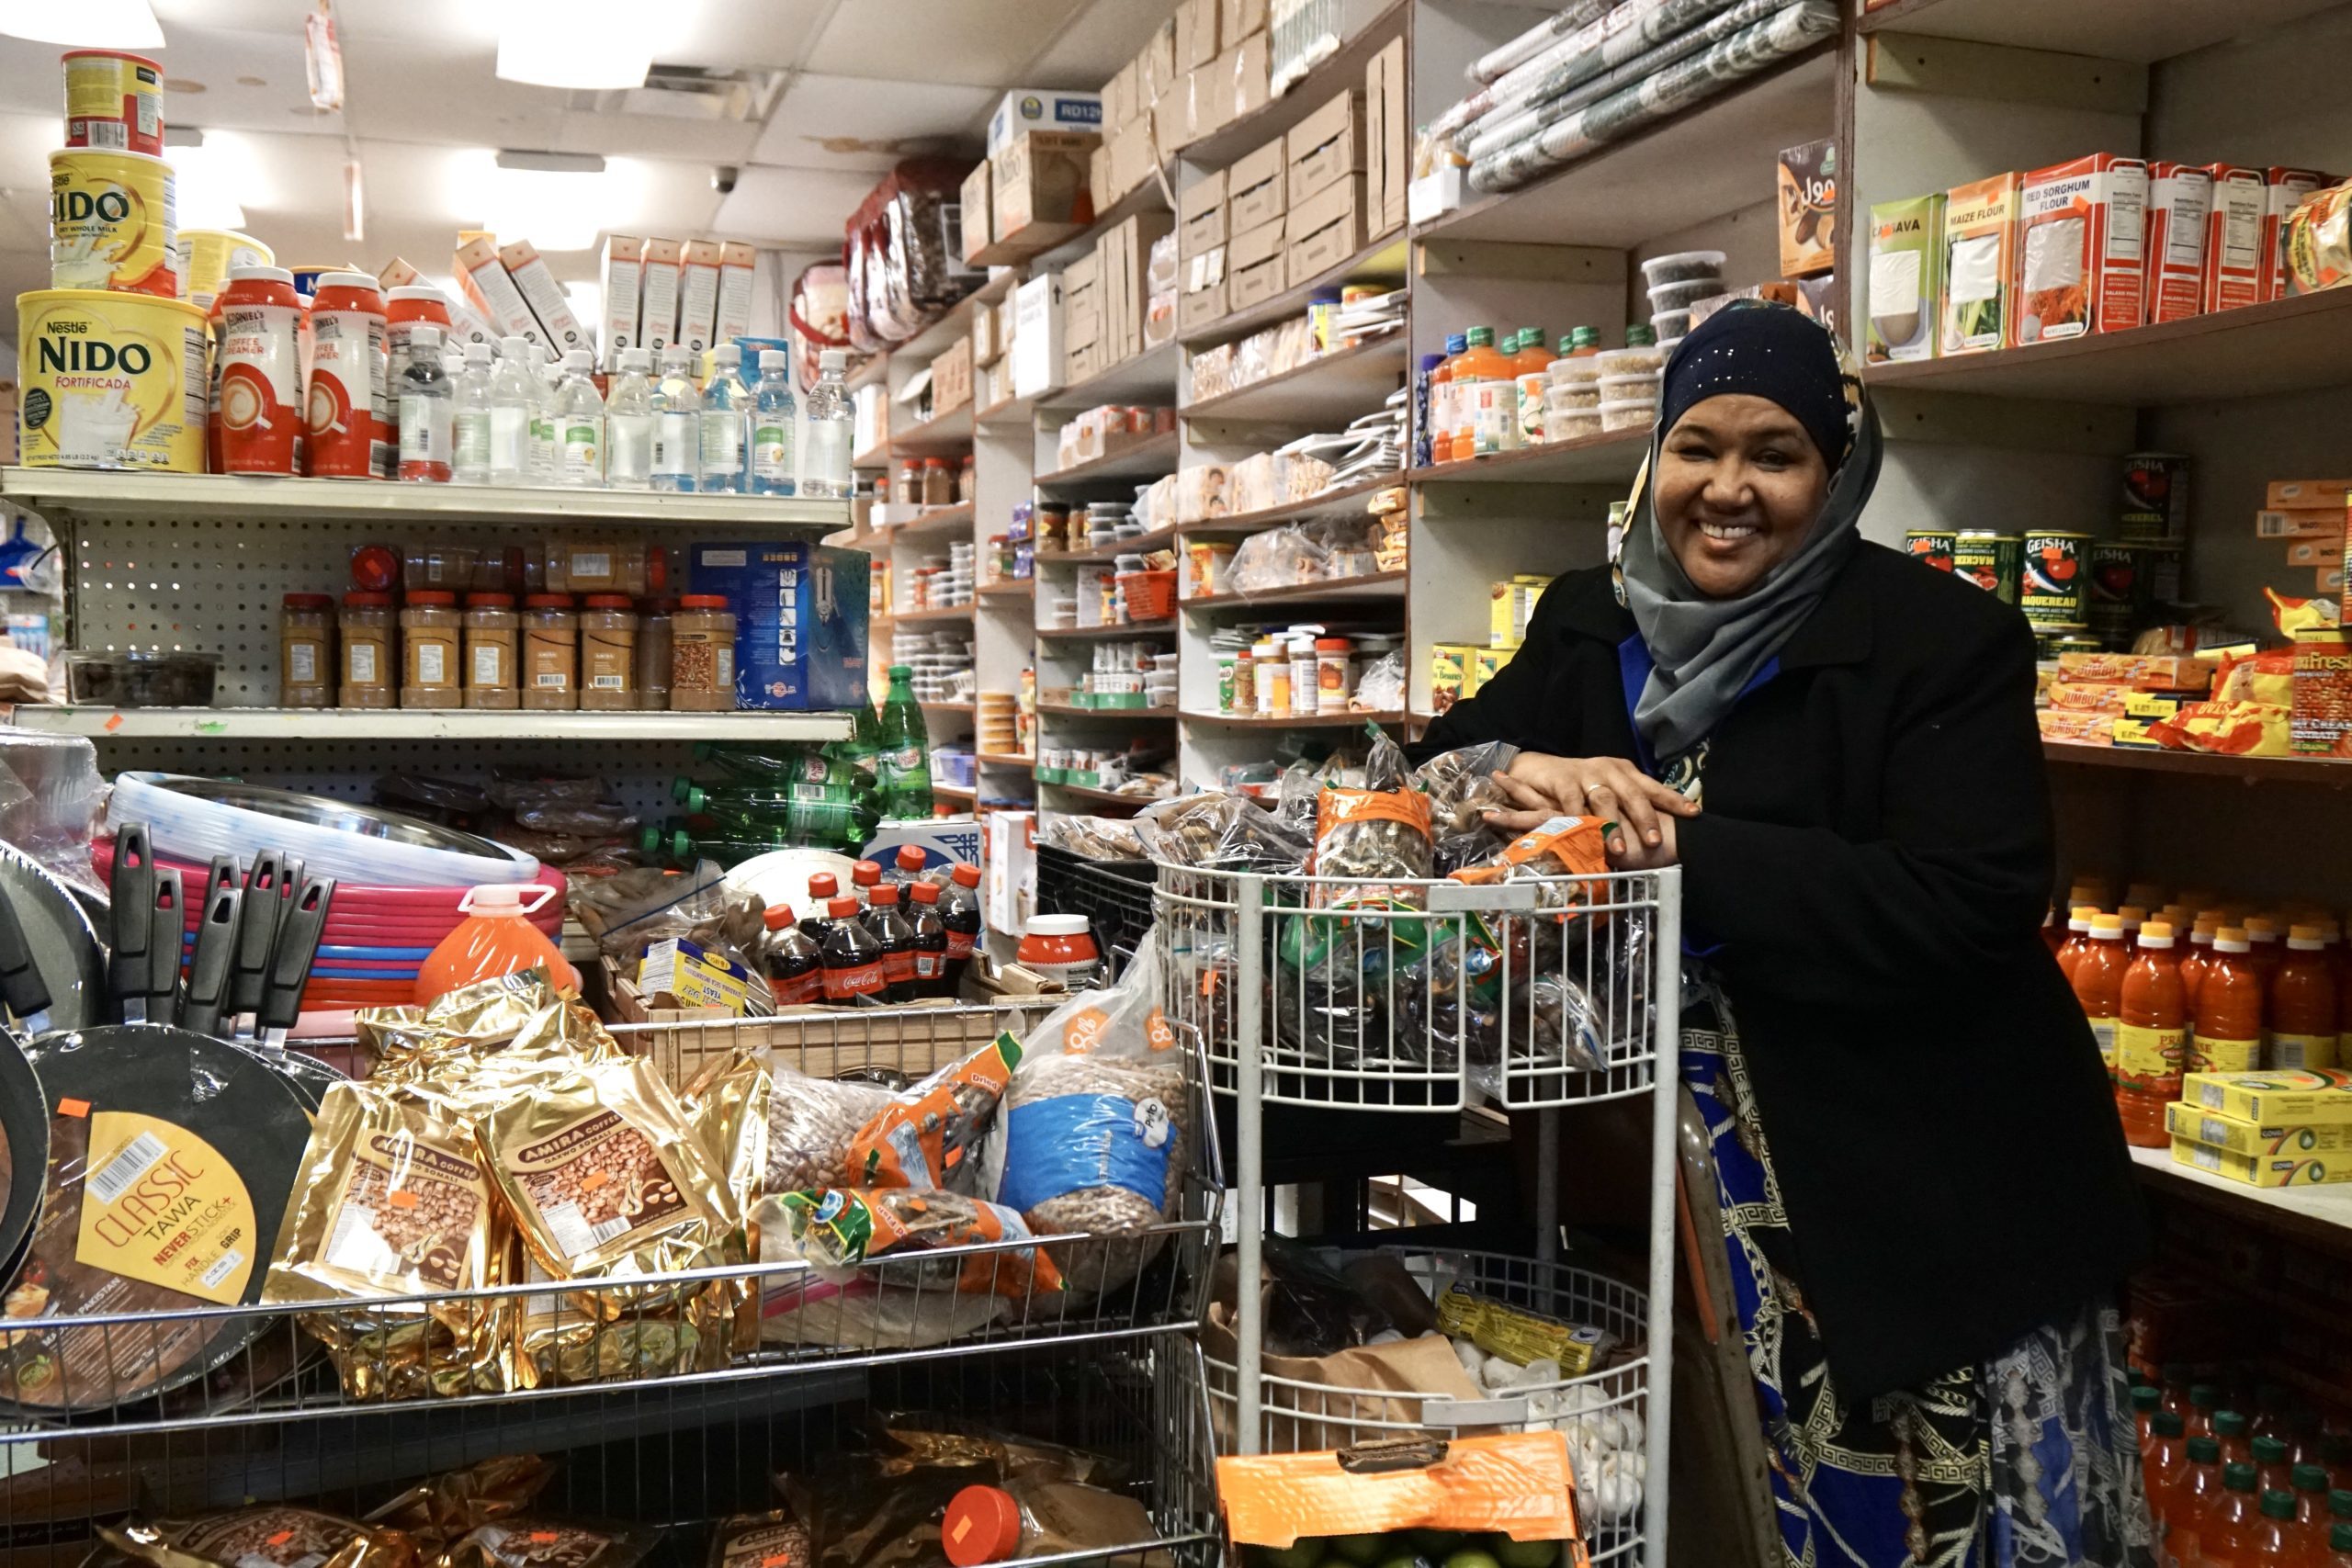 Shukri Abasheikh opened the Mogadishu Business Center and Restaurant in Lewiston in 2006, where she sells groceries and freshly cooked Somali food. While she appreciates the exposure of being listed on Black Owned Maine, she said that all businesses, despite the race of their owners, need support now because of the pandemic. Photo by Hannah Rafkin.